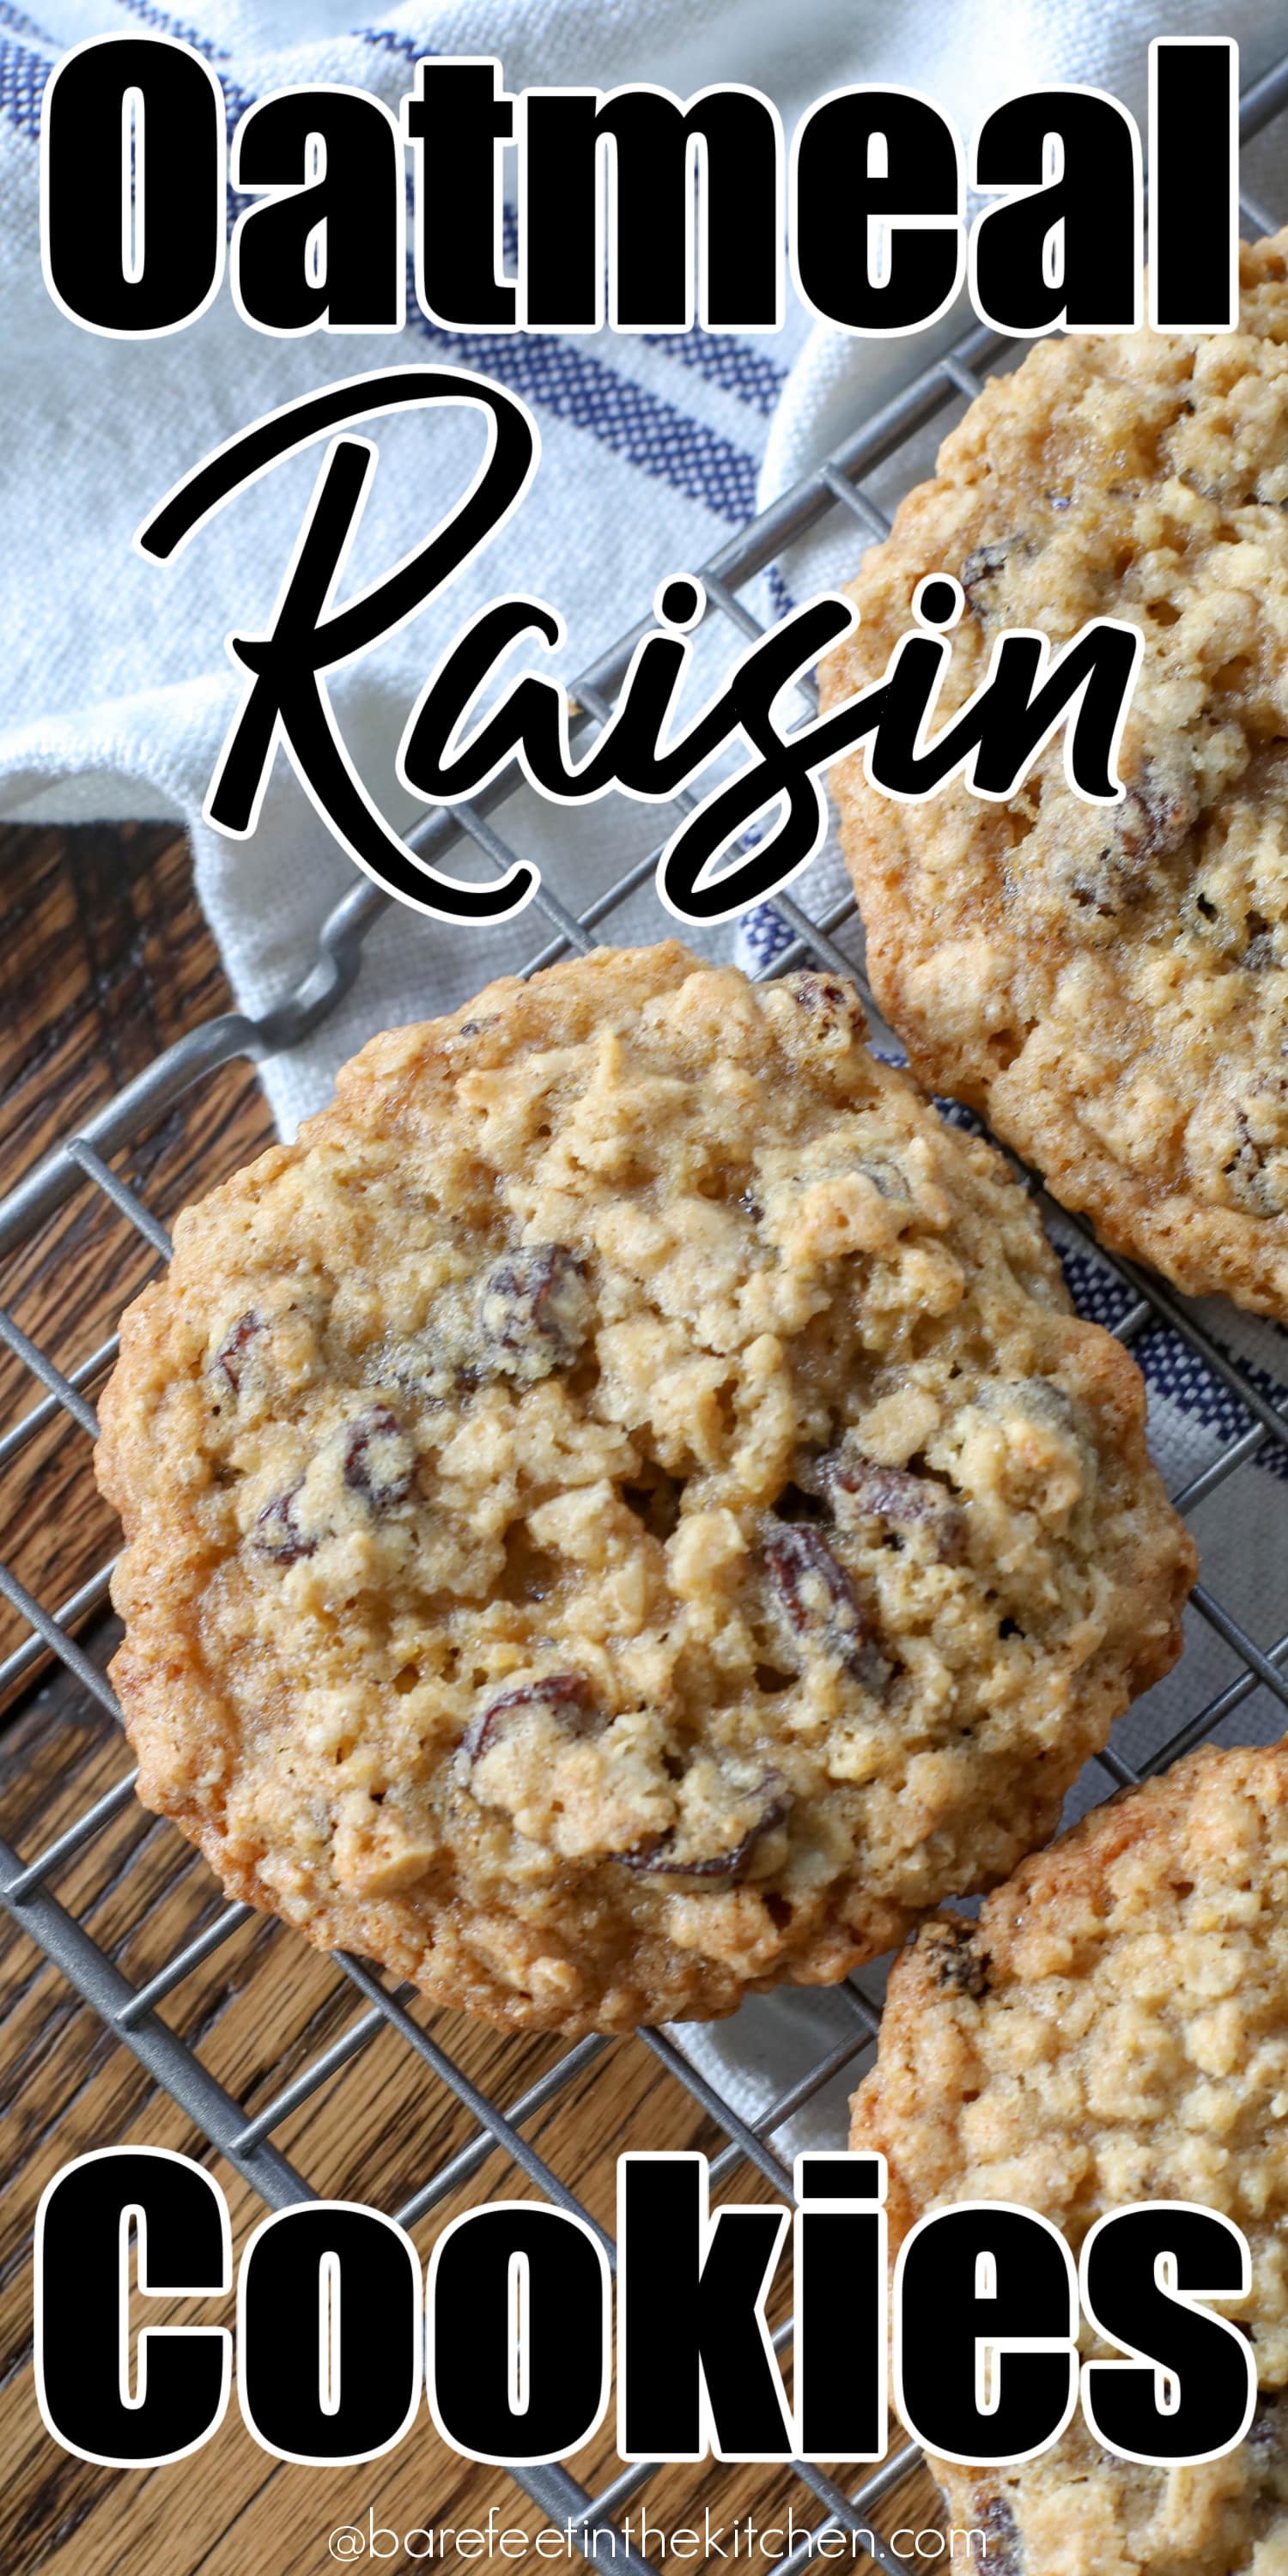 Soft Raisin Filled Cookies - Old Fashioned Raisin Filled ...